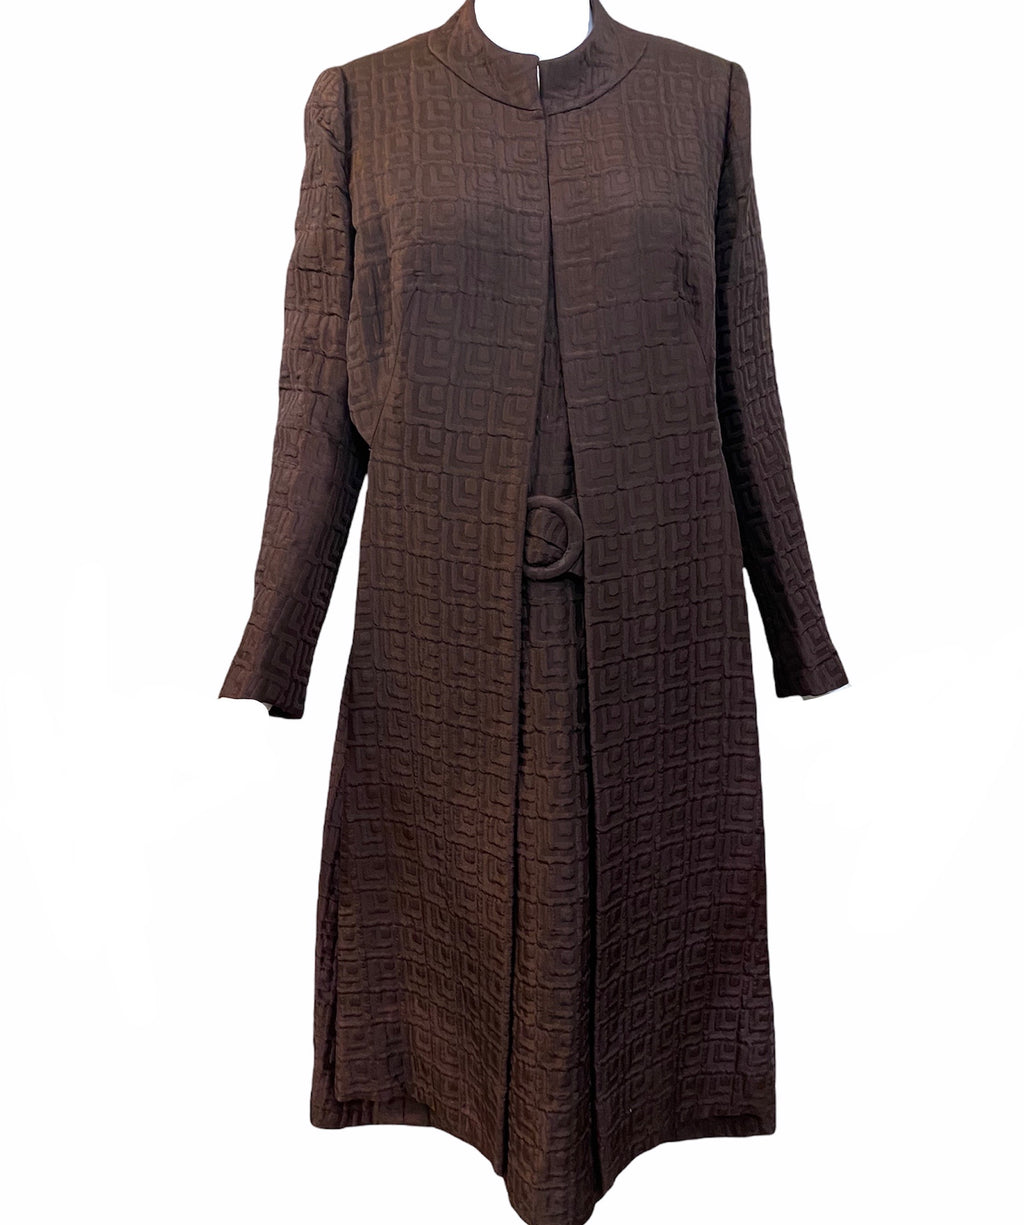 Anne Lise 60s Brown Matelasse Afternoon Dress Ensemble FRONT 1 of 7